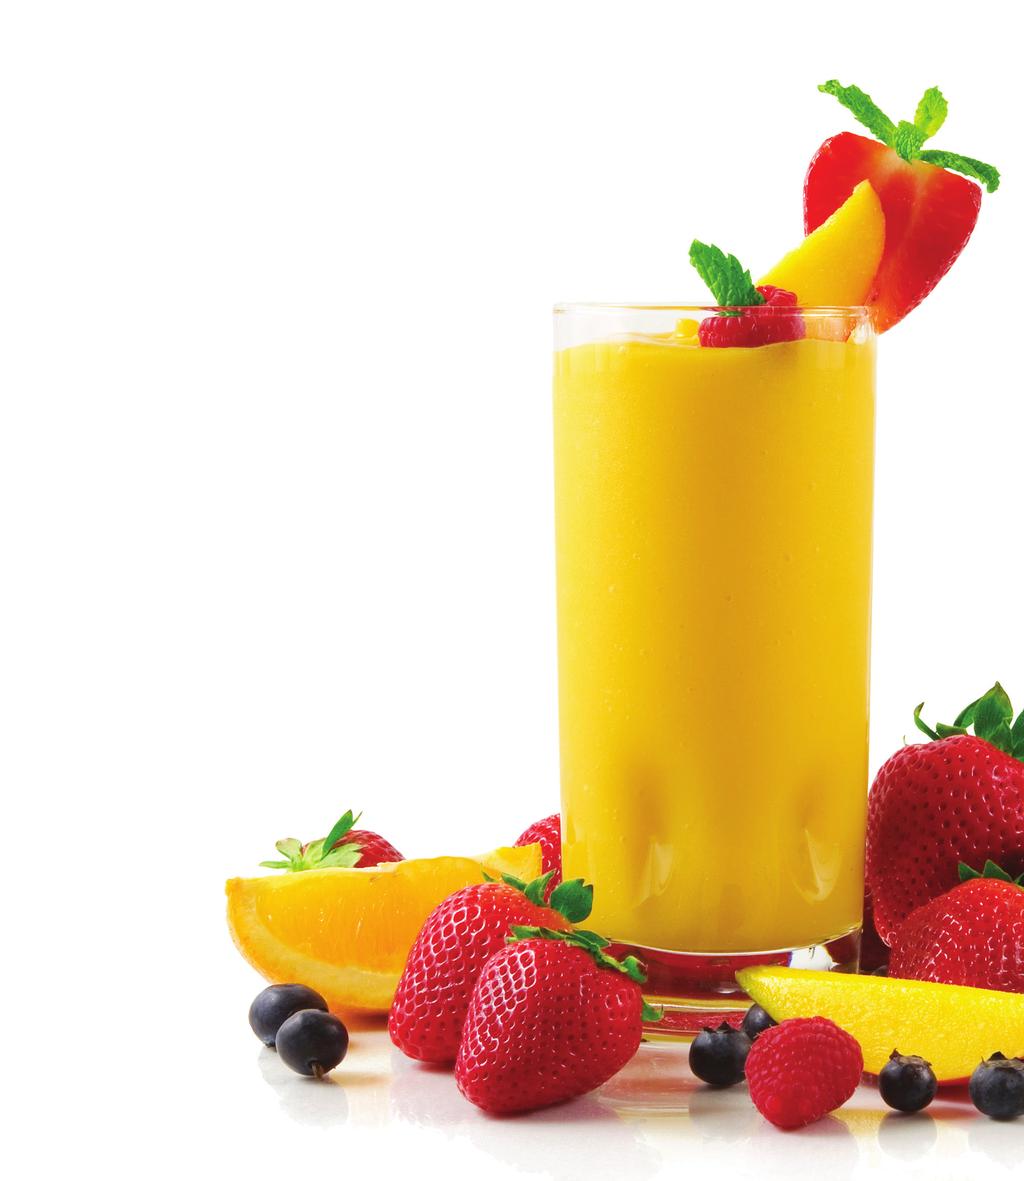 SMOOTHIES & MILKSHAKES SMOOTHIES & MILKSHAKES Tutti-Frutti Smoothie Makes six 227ml (8oz) servings Tofu is a good source of protein and a nice alternative to using dairy products in smoothies.